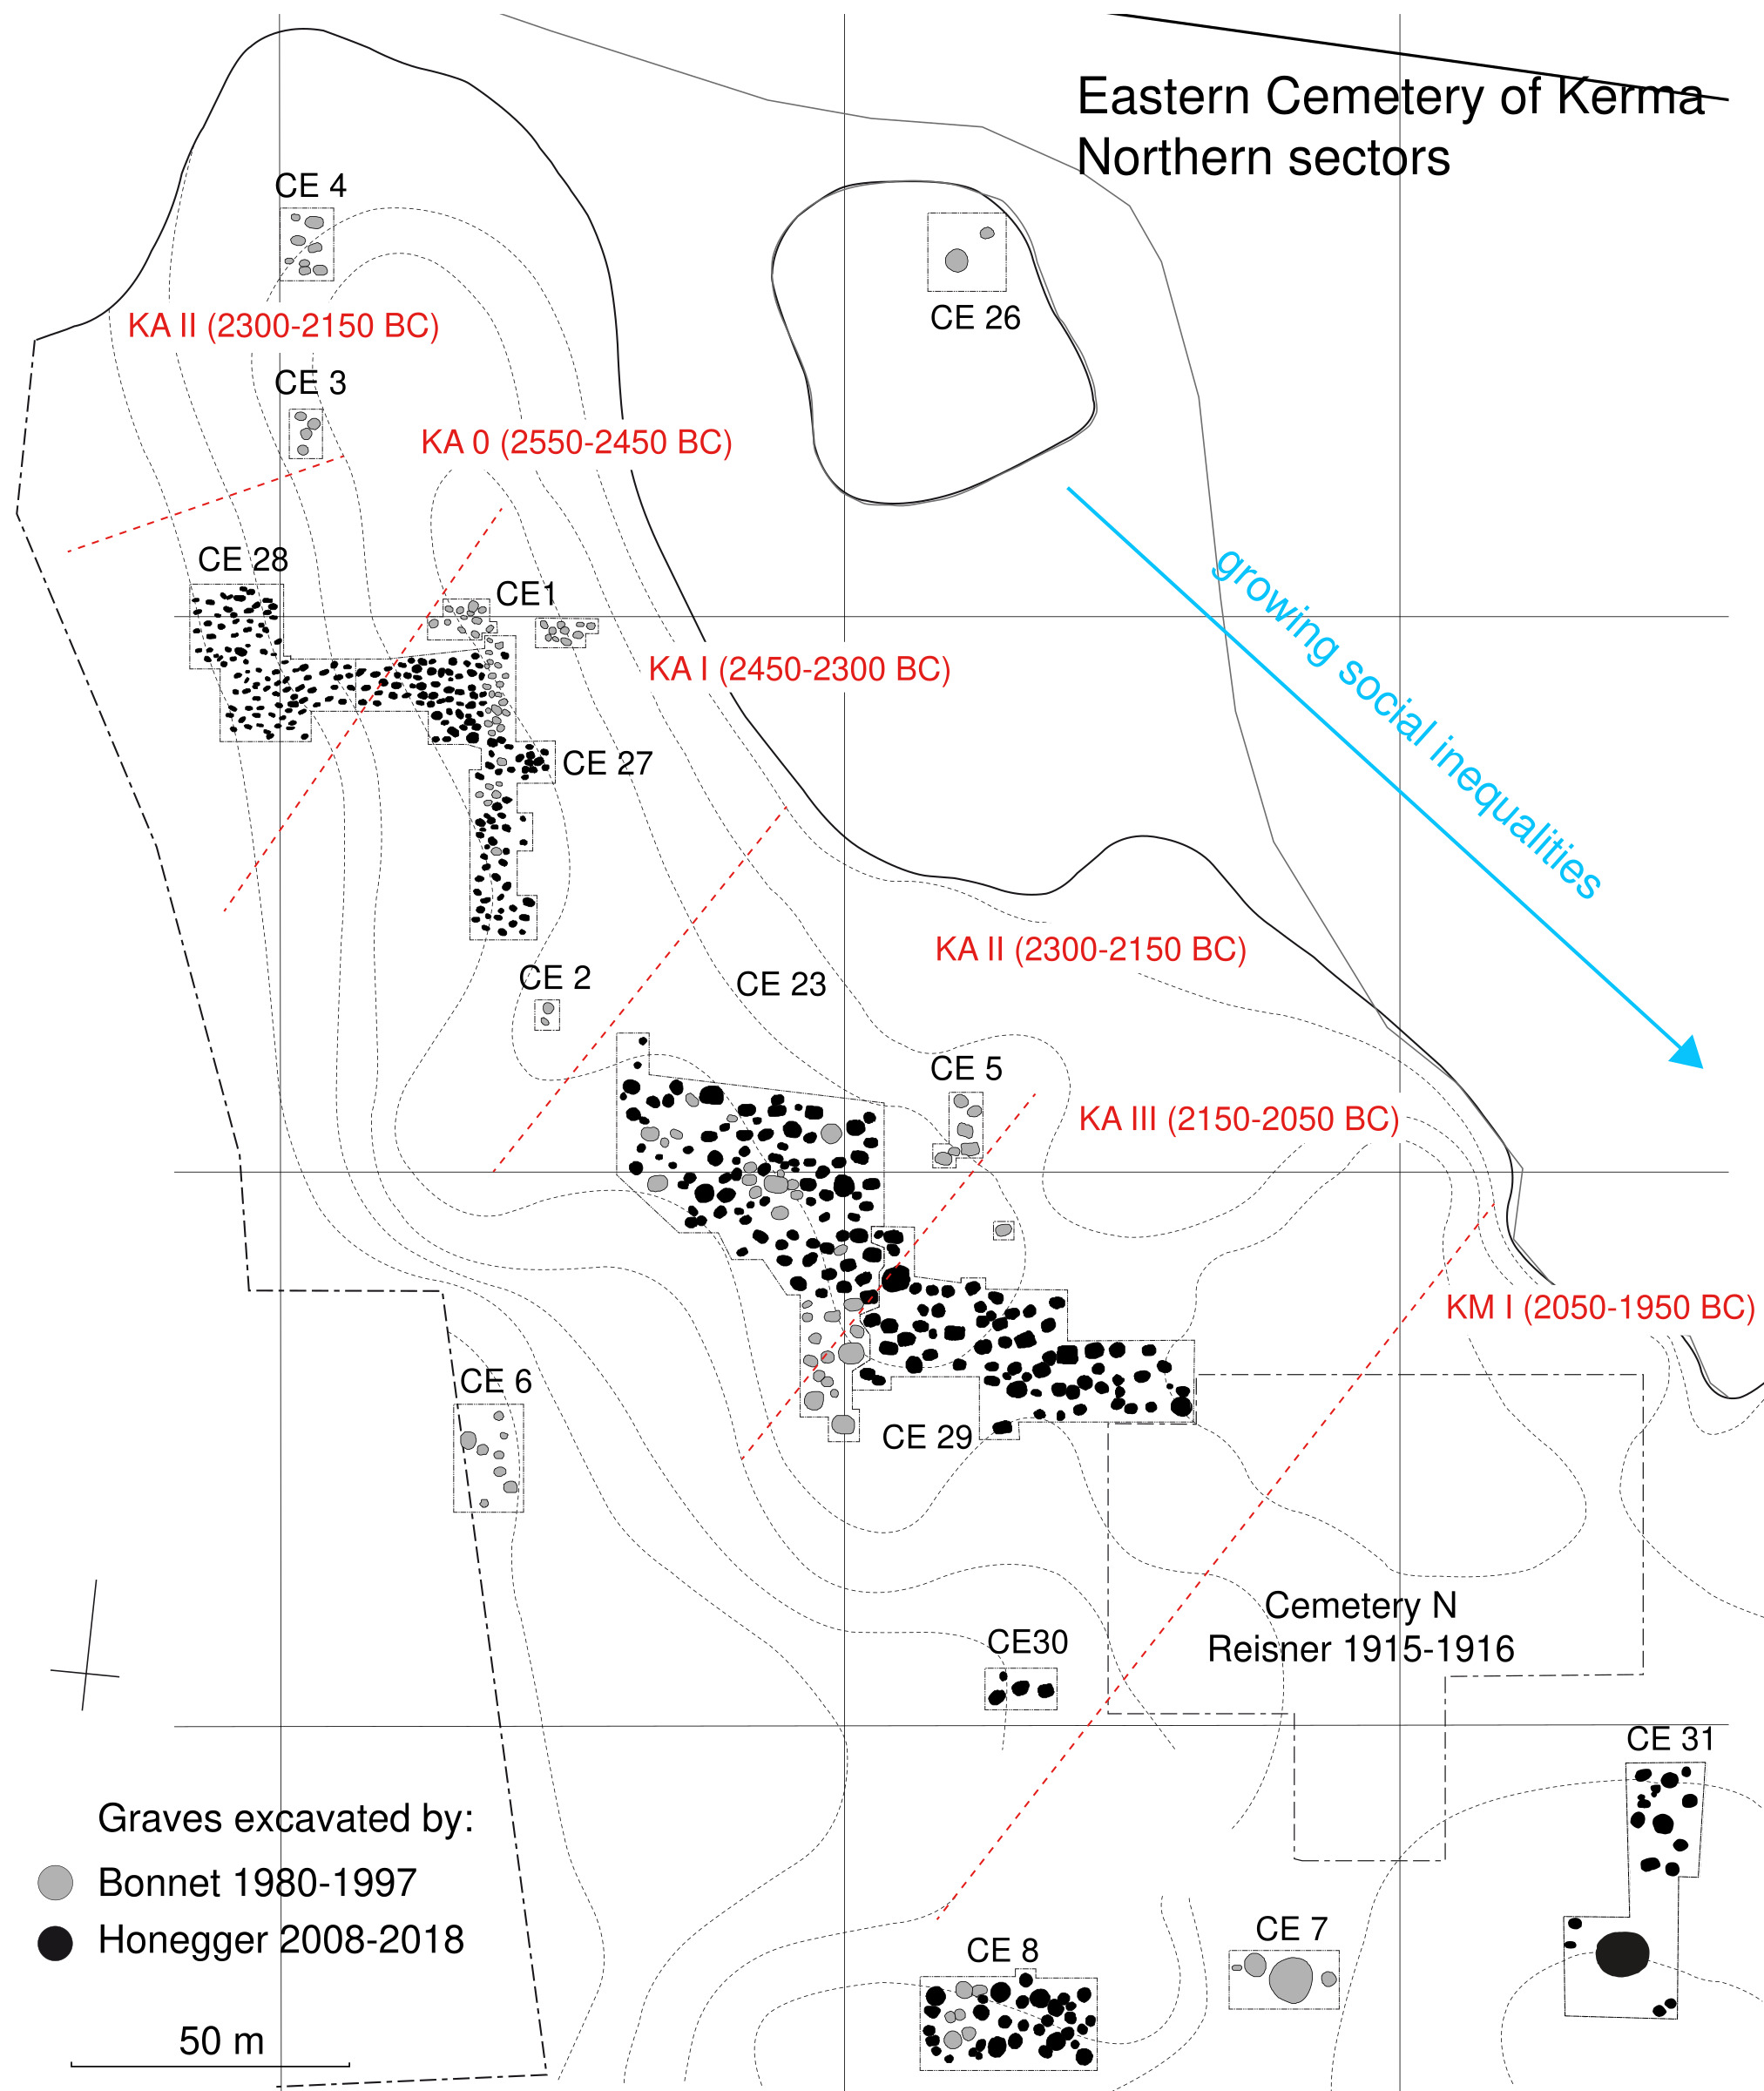 Map of the Early Kerma and early Middle Kerma sectors in the Eastern Cemetery. From the initial installation in Kerma ancien 0 (2550-2450 BC) to the emergence of the first royal tomb in Kerma moyen I (2050-1950 BC), the dimensions of the tombs increase, the rituals become more complex and the hierarchisation of society increases until the appearance of a royalty.